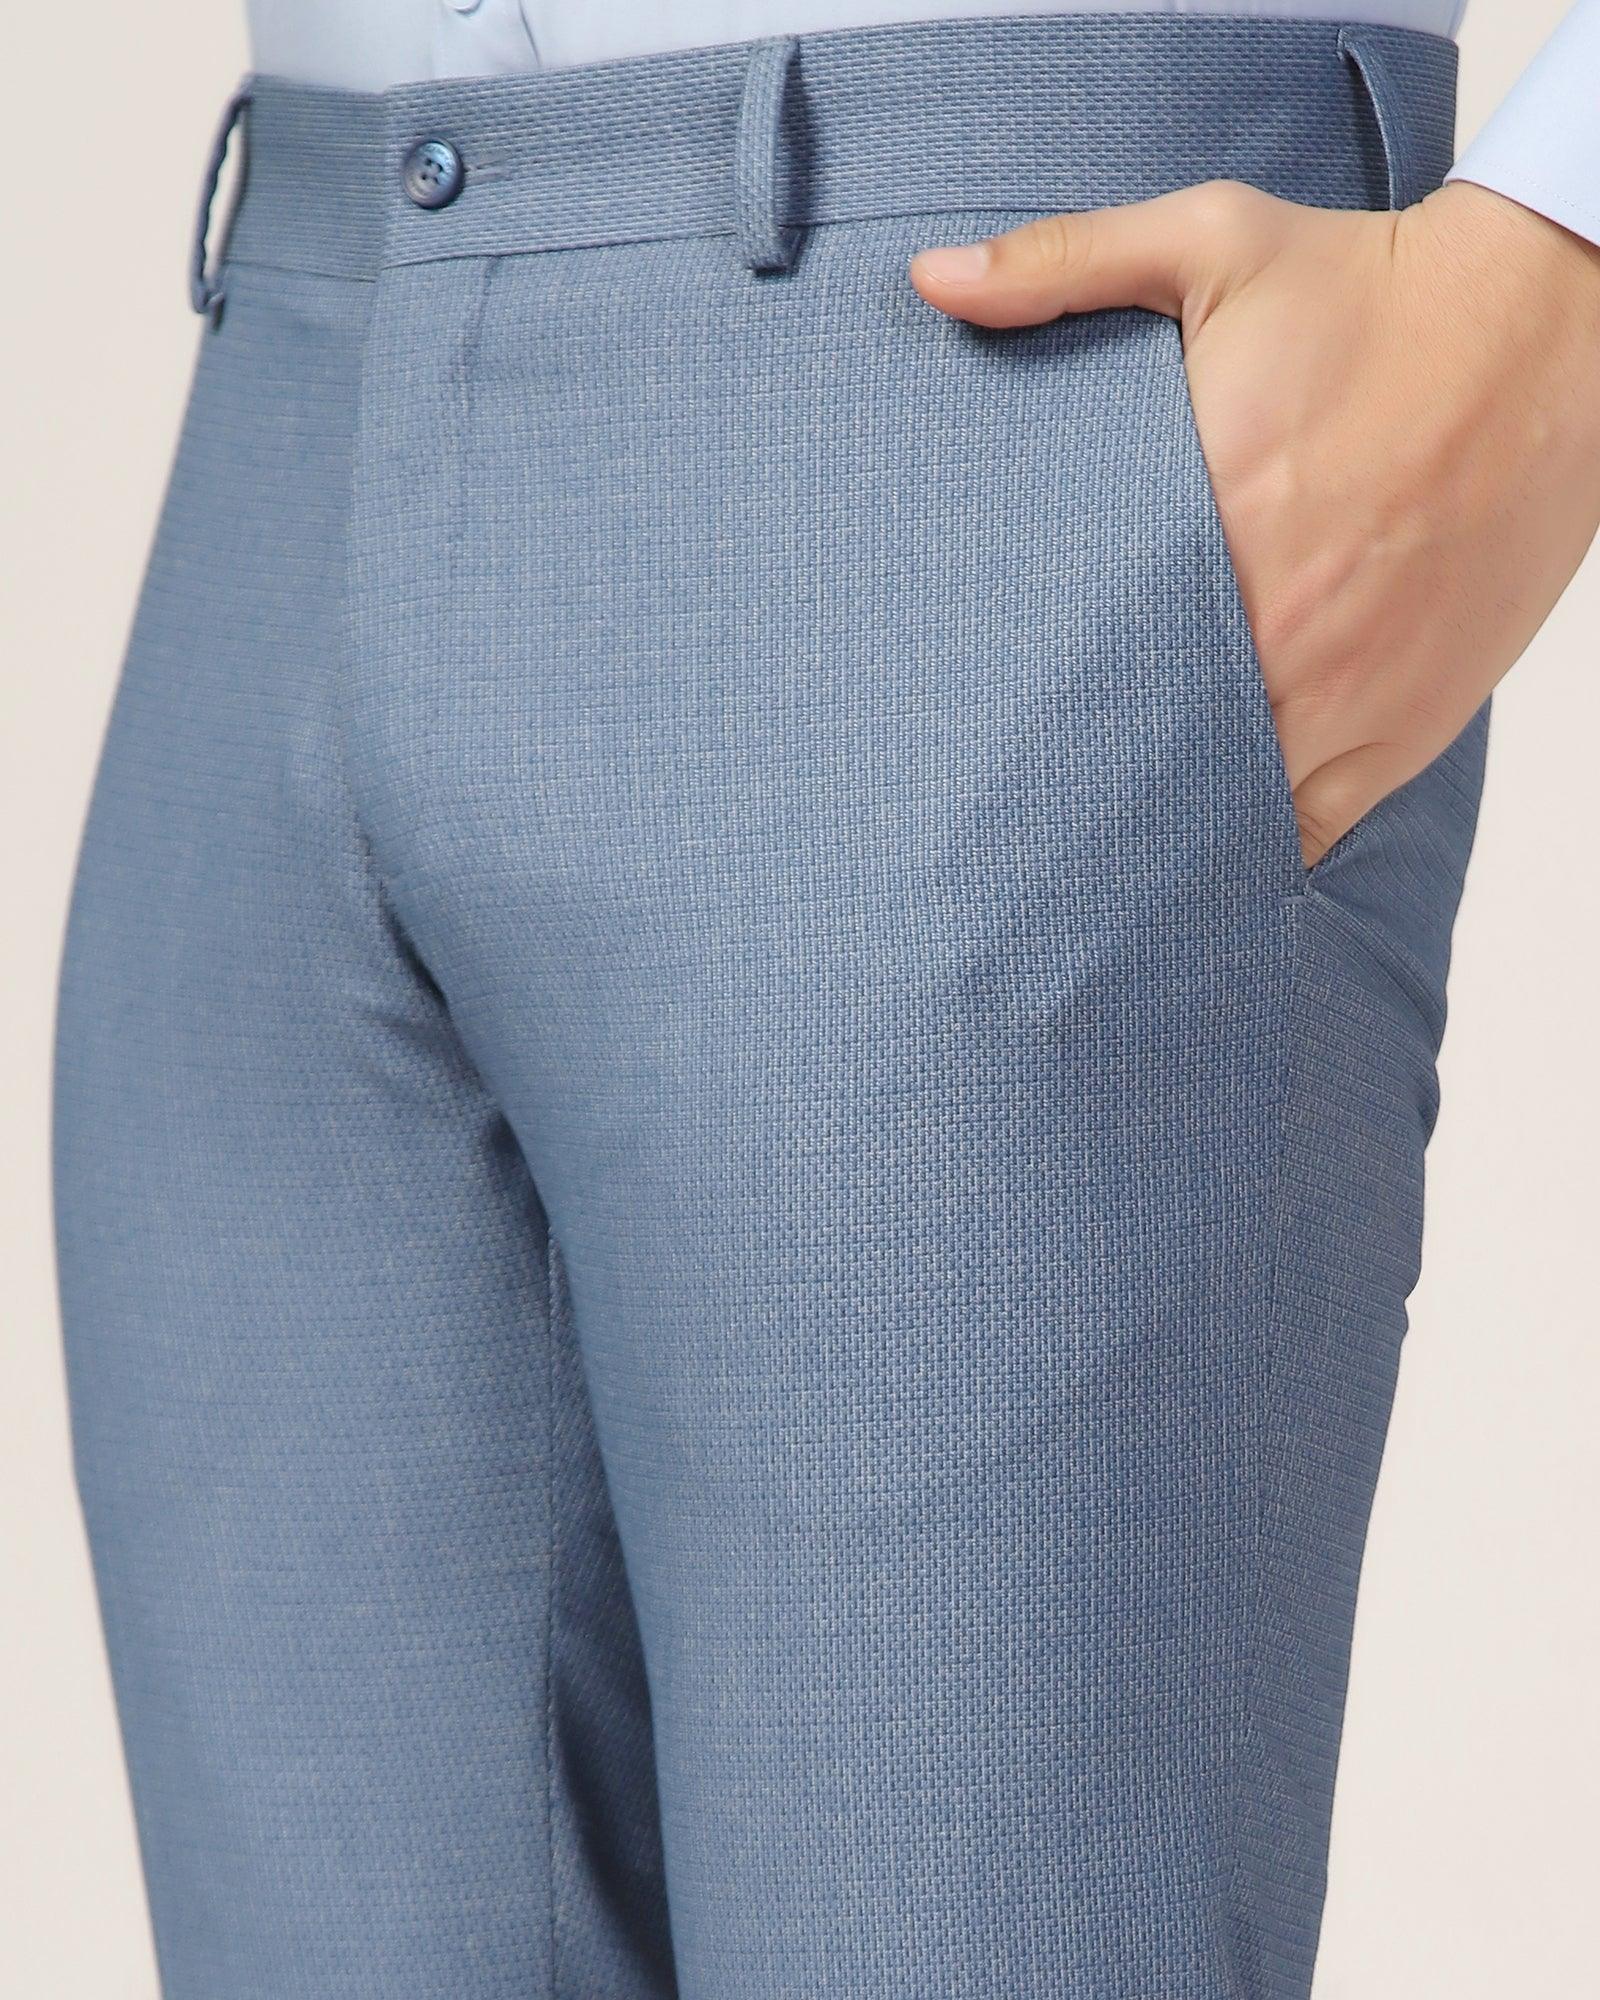 Phoenix Pleated Formal Blue Textured Trouser - Trident